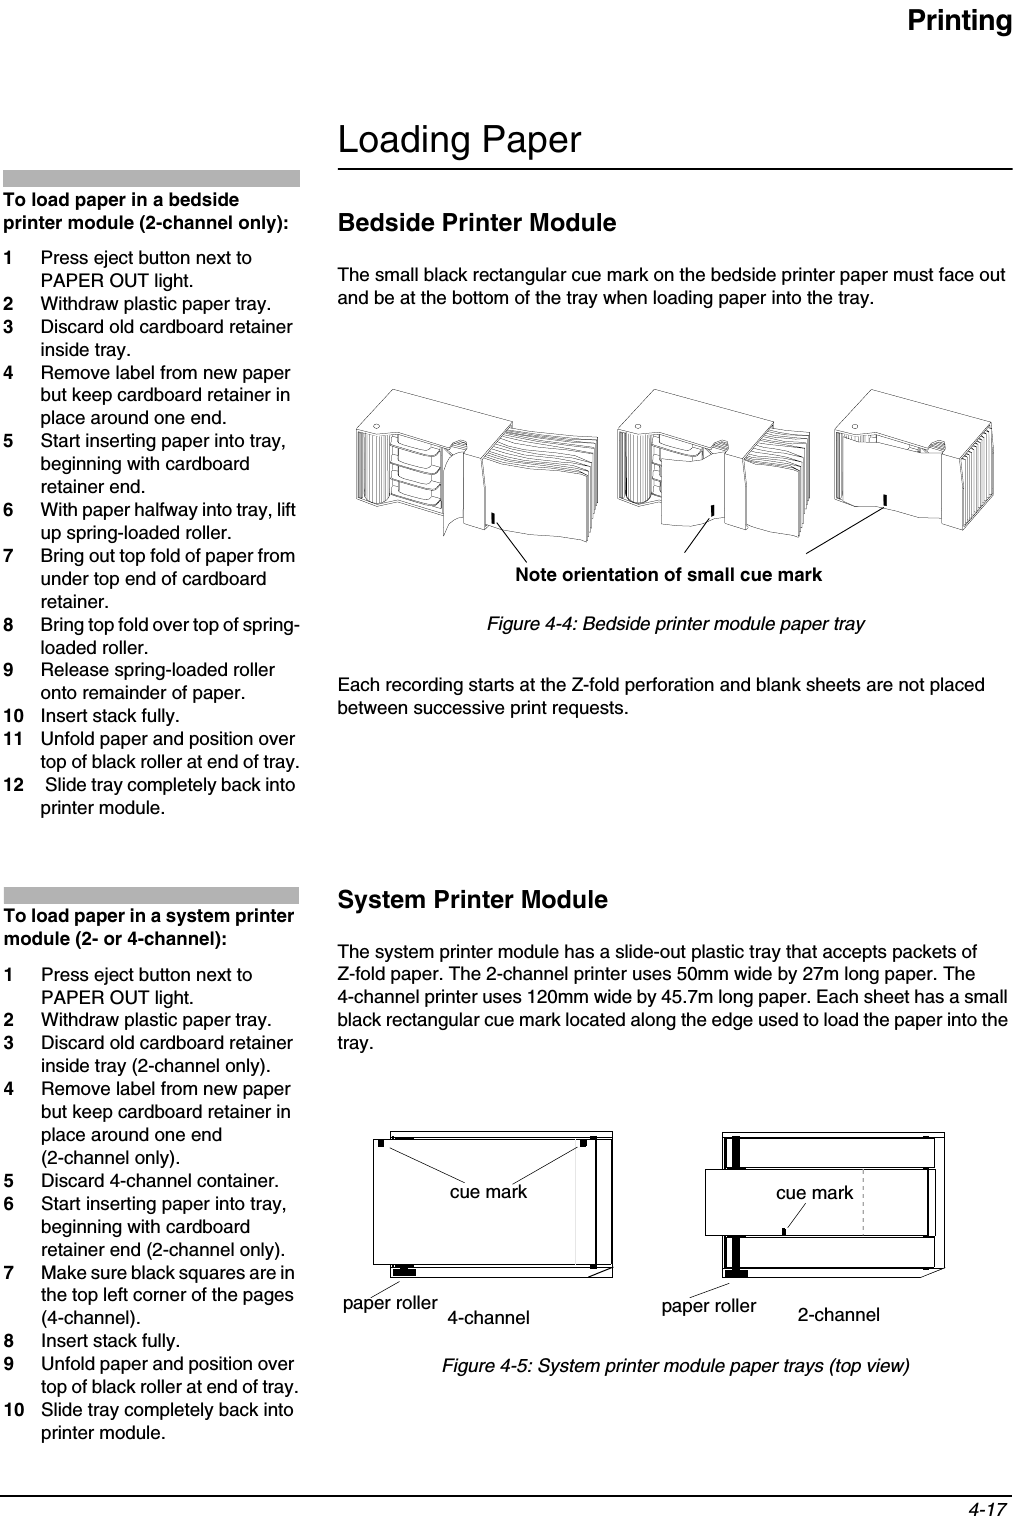 Printing4-17 Loading PaperBedside Printer ModuleThe small black rectangular cue mark on the bedside printer paper must face out and be at the bottom of the tray when loading paper into the tray.Figure 4-4: Bedside printer module paper trayEach recording starts at the Z-fold perforation and blank sheets are not placed between successive print requests.System Printer ModuleThe system printer module has a slide-out plastic tray that accepts packets ofZ-fold paper. The 2-channel printer uses 50mm wide by 27m long paper. The 4-channel printer uses 120mm wide by 45.7m long paper. Each sheet has a small black rectangular cue mark located along the edge used to load the paper into the tray.Figure 4-5: System printer module paper trays (top view)To load paper in a bedside printer module (2-channel only):1Press eject button next to PAPER OUT light. 2Withdraw plastic paper tray. 3Discard old cardboard retainer inside tray.4Remove label from new paper but keep cardboard retainer in place around one end.5Start inserting paper into tray, beginning with cardboard retainer end.6With paper halfway into tray, lift up spring-loaded roller.7Bring out top fold of paper from under top end of cardboard retainer.8Bring top fold over top of spring-loaded roller.9Release spring-loaded roller onto remainder of paper.10 Insert stack fully.11 Unfold paper and position over top of black roller at end of tray.12  Slide tray completely back into printer module.Note orientation of small cue markTo load paper in a system printer module (2- or 4-channel):1Press eject button next to PAPER OUT light.2Withdraw plastic paper tray.3Discard old cardboard retainer inside tray (2-channel only).4Remove label from new paper but keep cardboard retainer in place around one end (2-channel only).5Discard 4-channel container.6Start inserting paper into tray, beginning with cardboard retainer end (2-channel only).7Make sure black squares are in the top left corner of the pages (4-channel).8Insert stack fully.9Unfold paper and position over top of black roller at end of tray.10 Slide tray completely back into printer module.4-channel 2-channelpaper roller paper rollercue mark cue mark